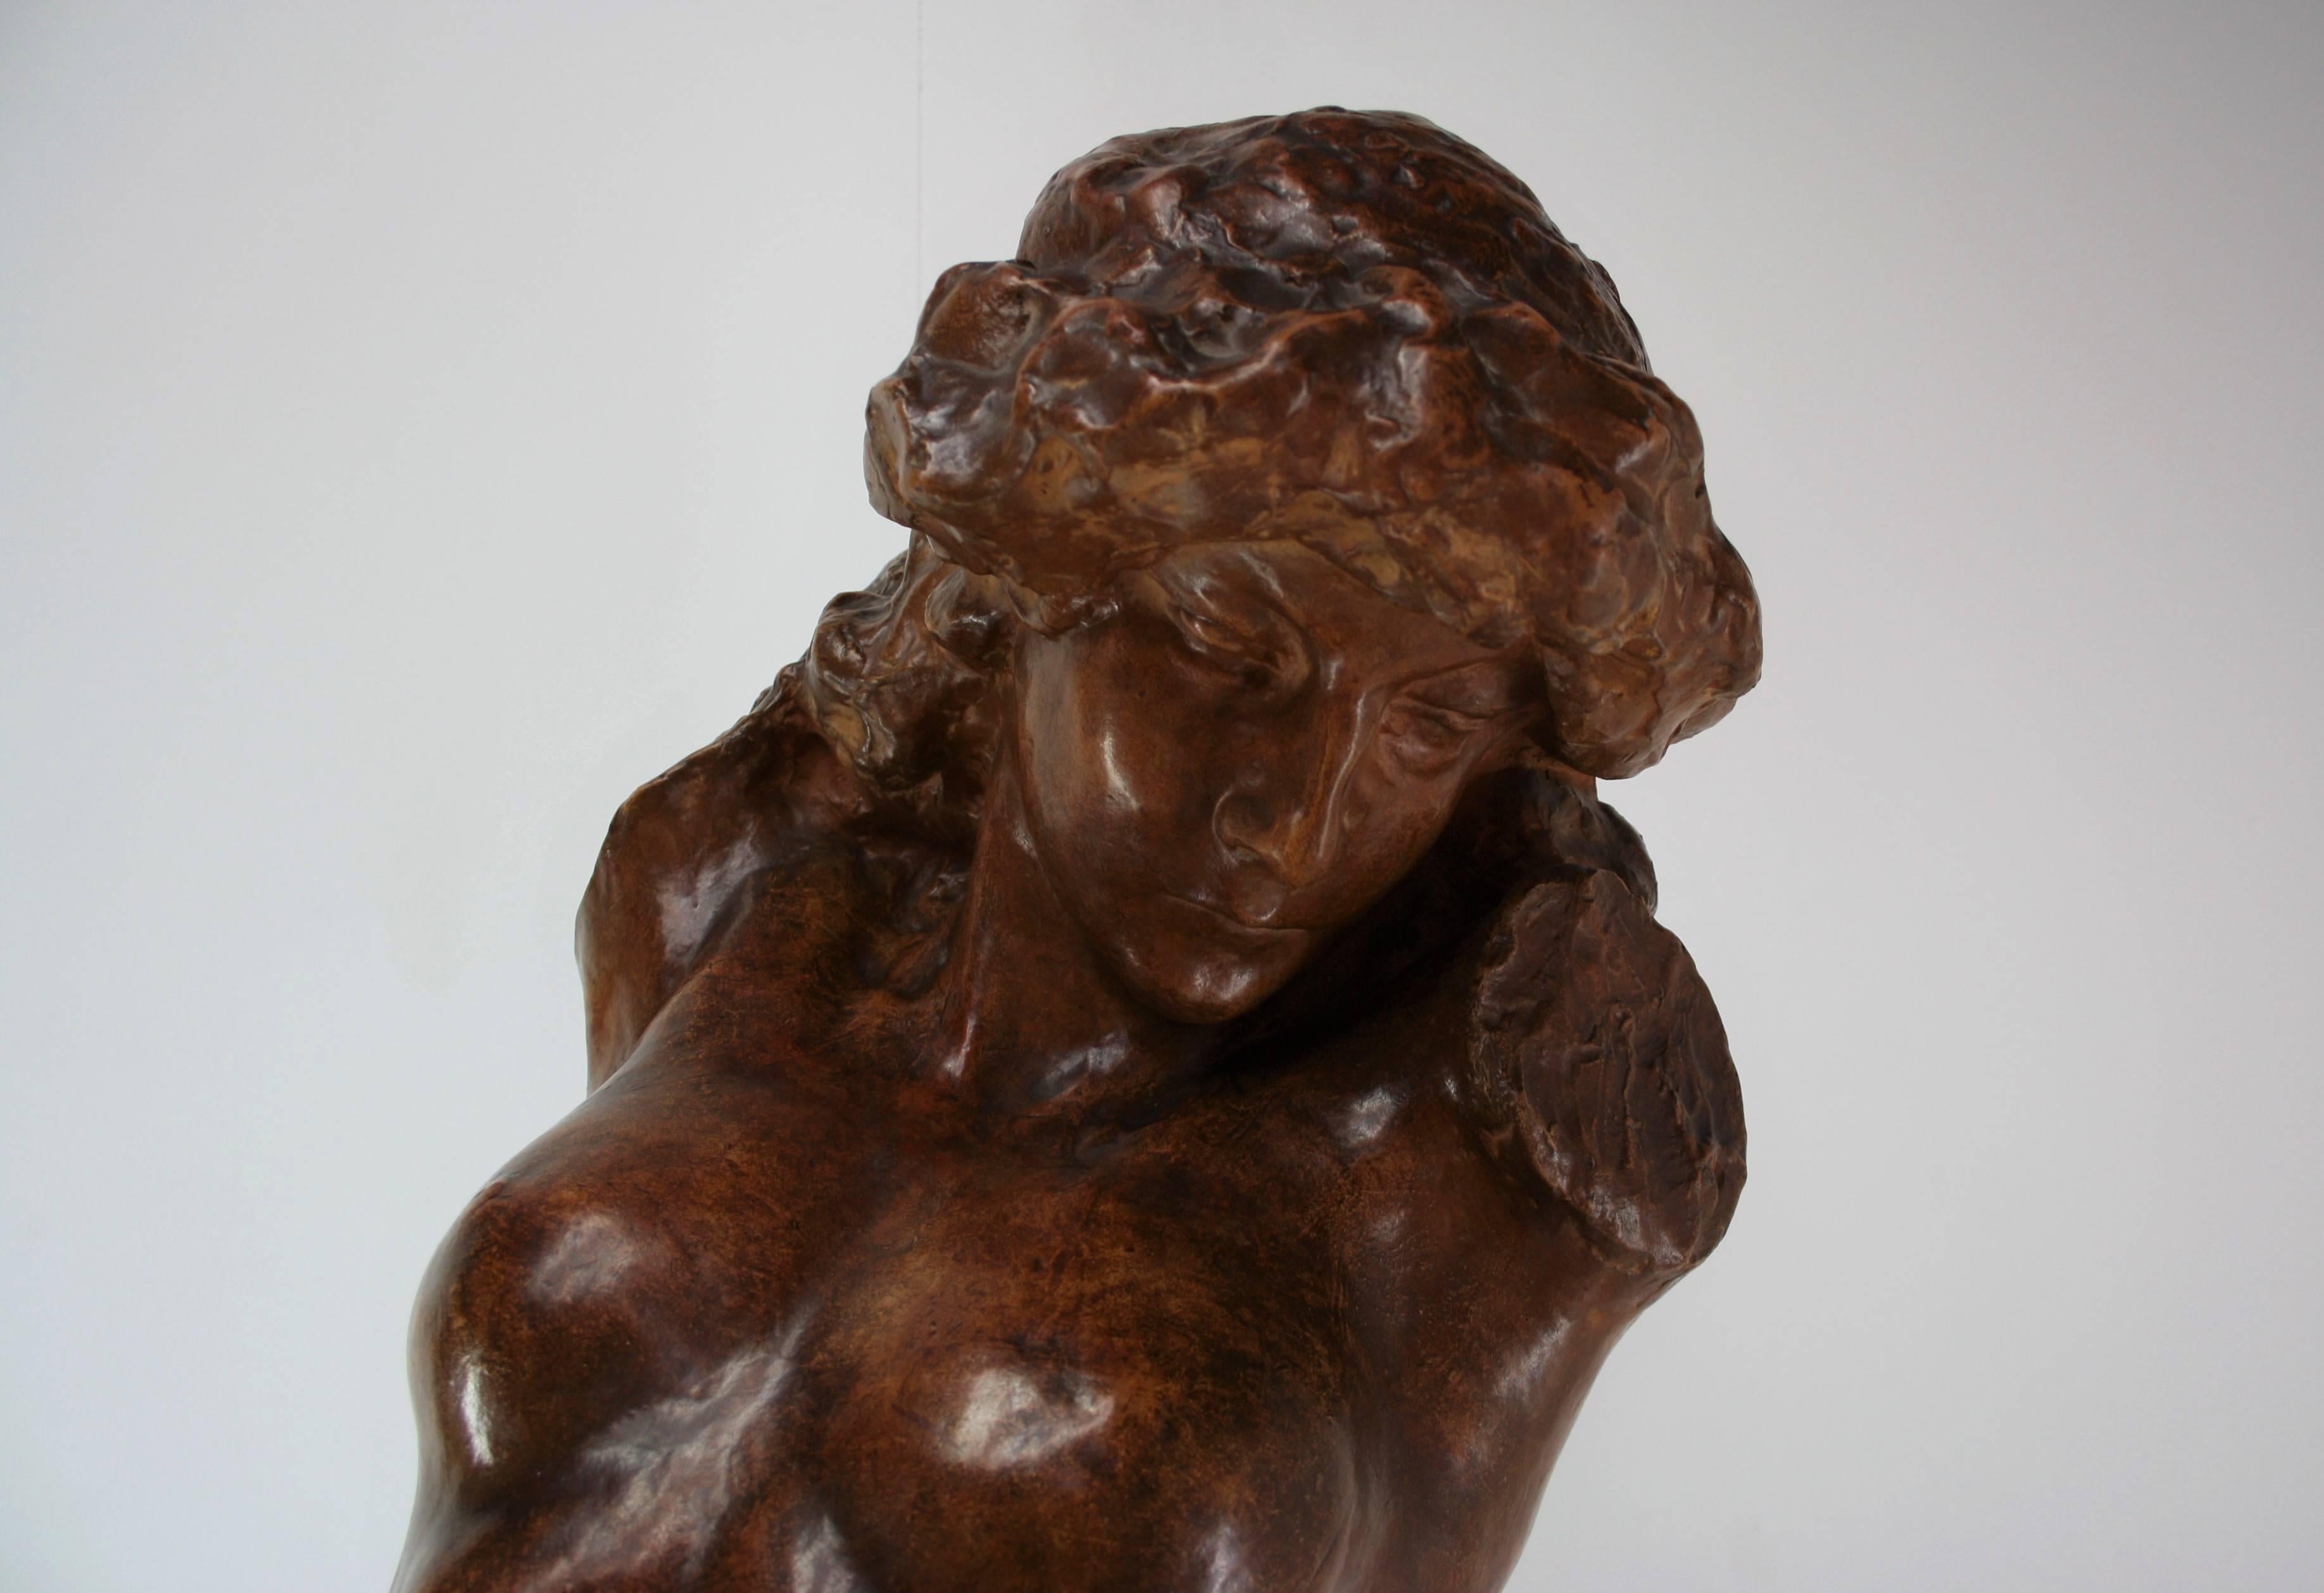 An Art Deco terracotta sculpture named Salomé from Georges Pierre Petit (1879-1958), Belgian - French Sculptor, made in 1919. Signature of the artist and stamp of workshop. Very nice old patina. Sold with a biography of the Artist from 1923.